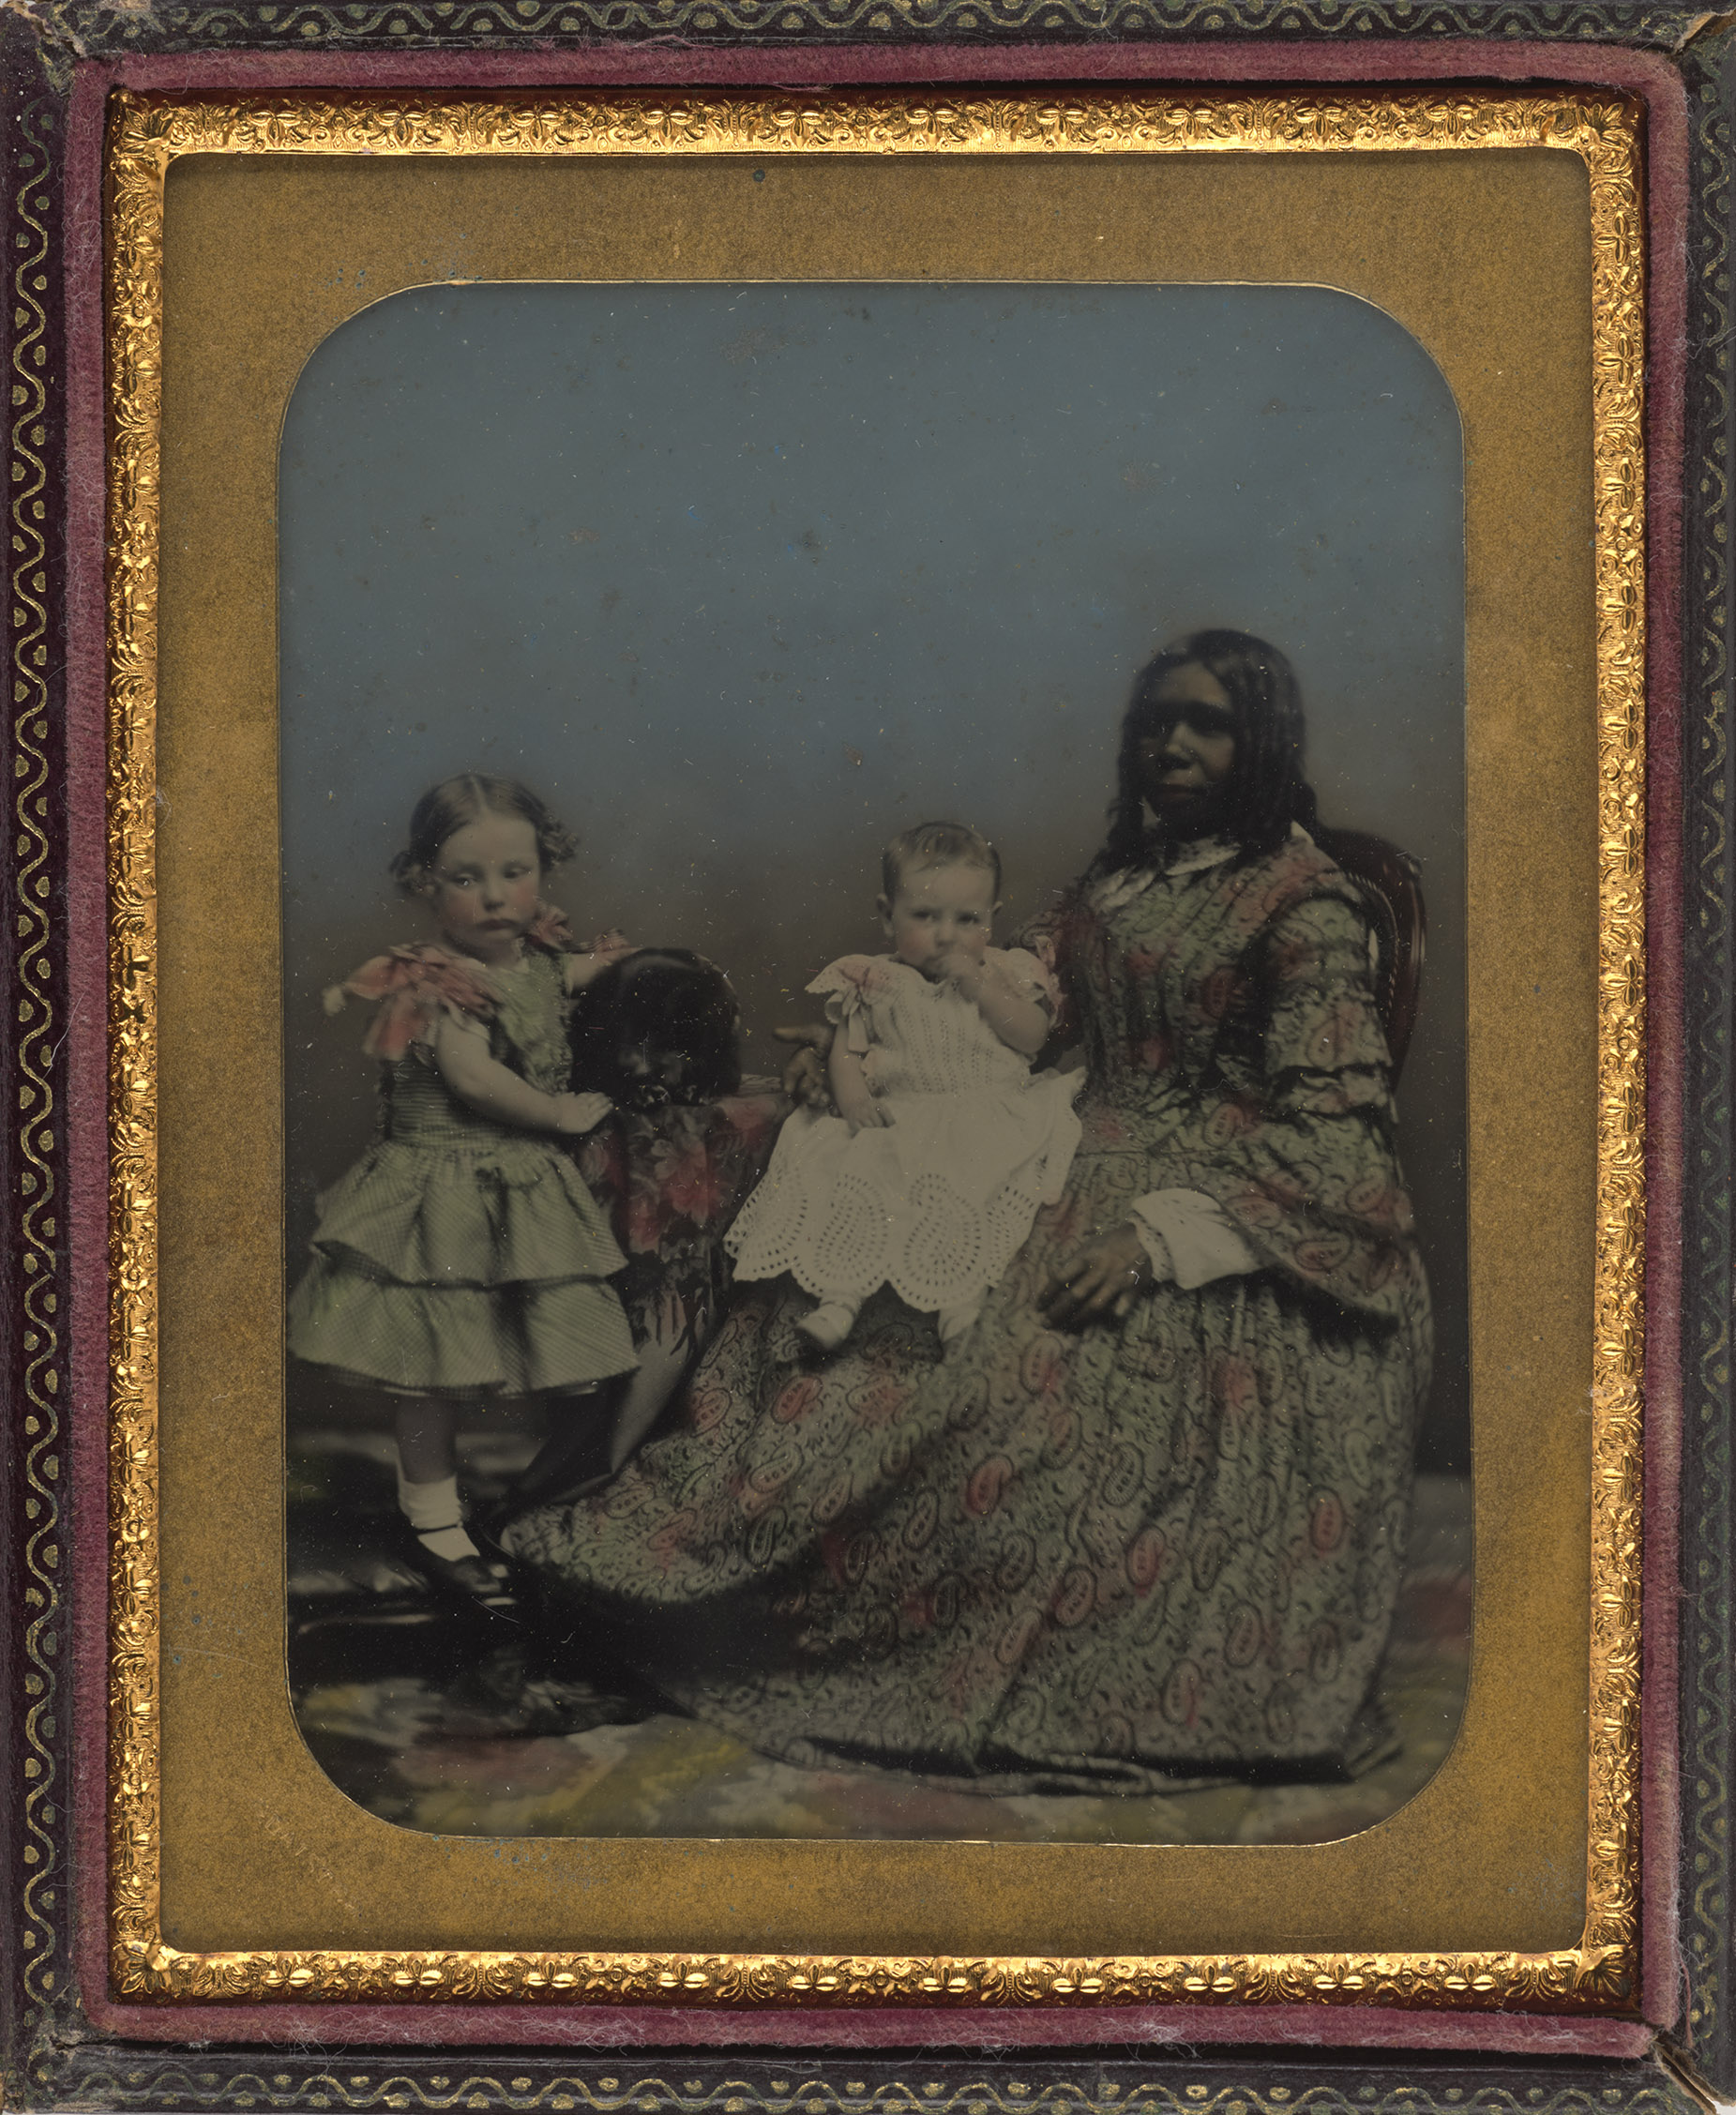 Ambrotype portrait with two young children and a woman